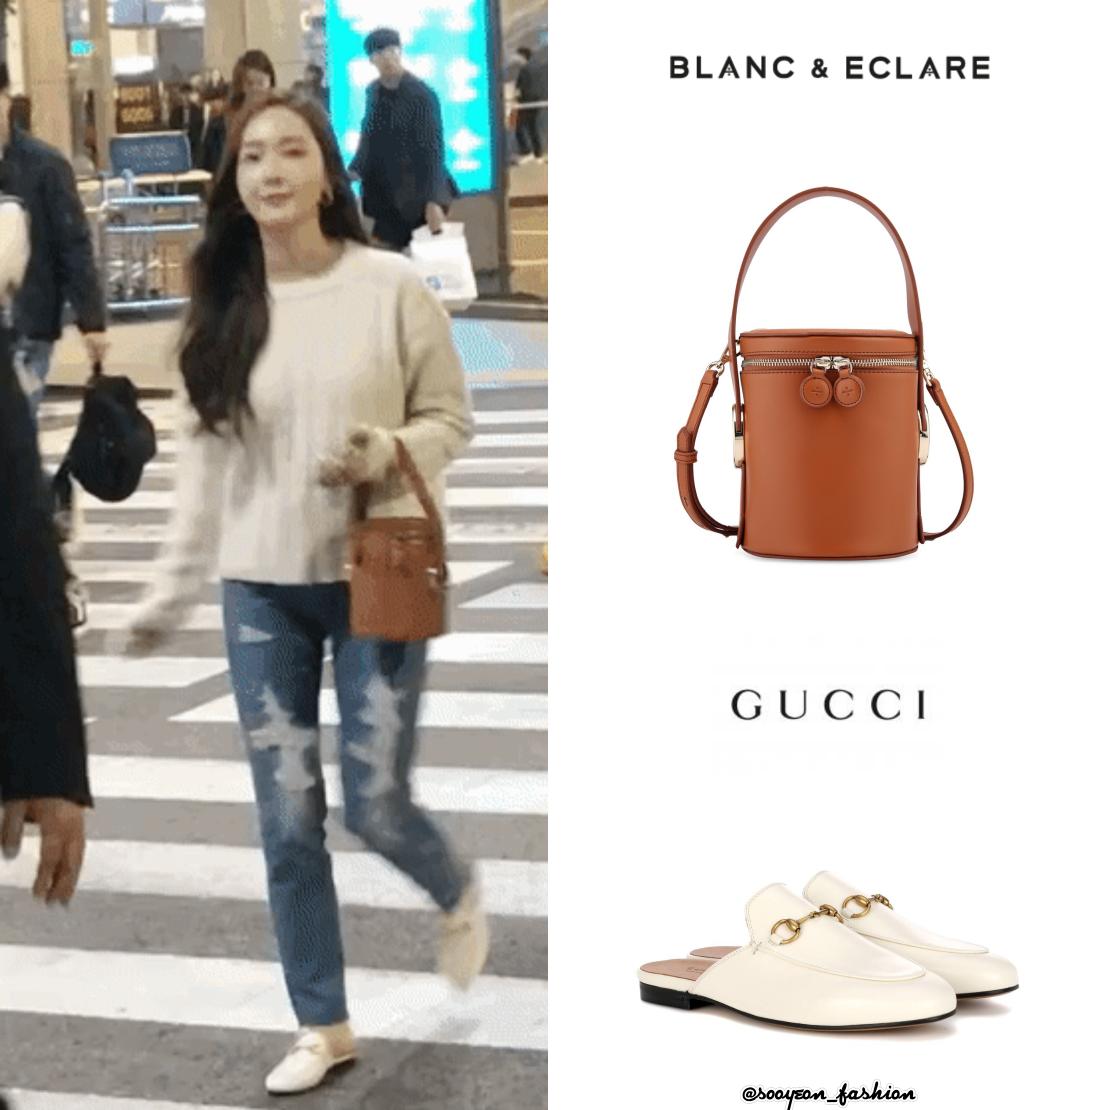 jsy fashion on X: 160706 Incheon Airport BAG: Delvaux Tempete